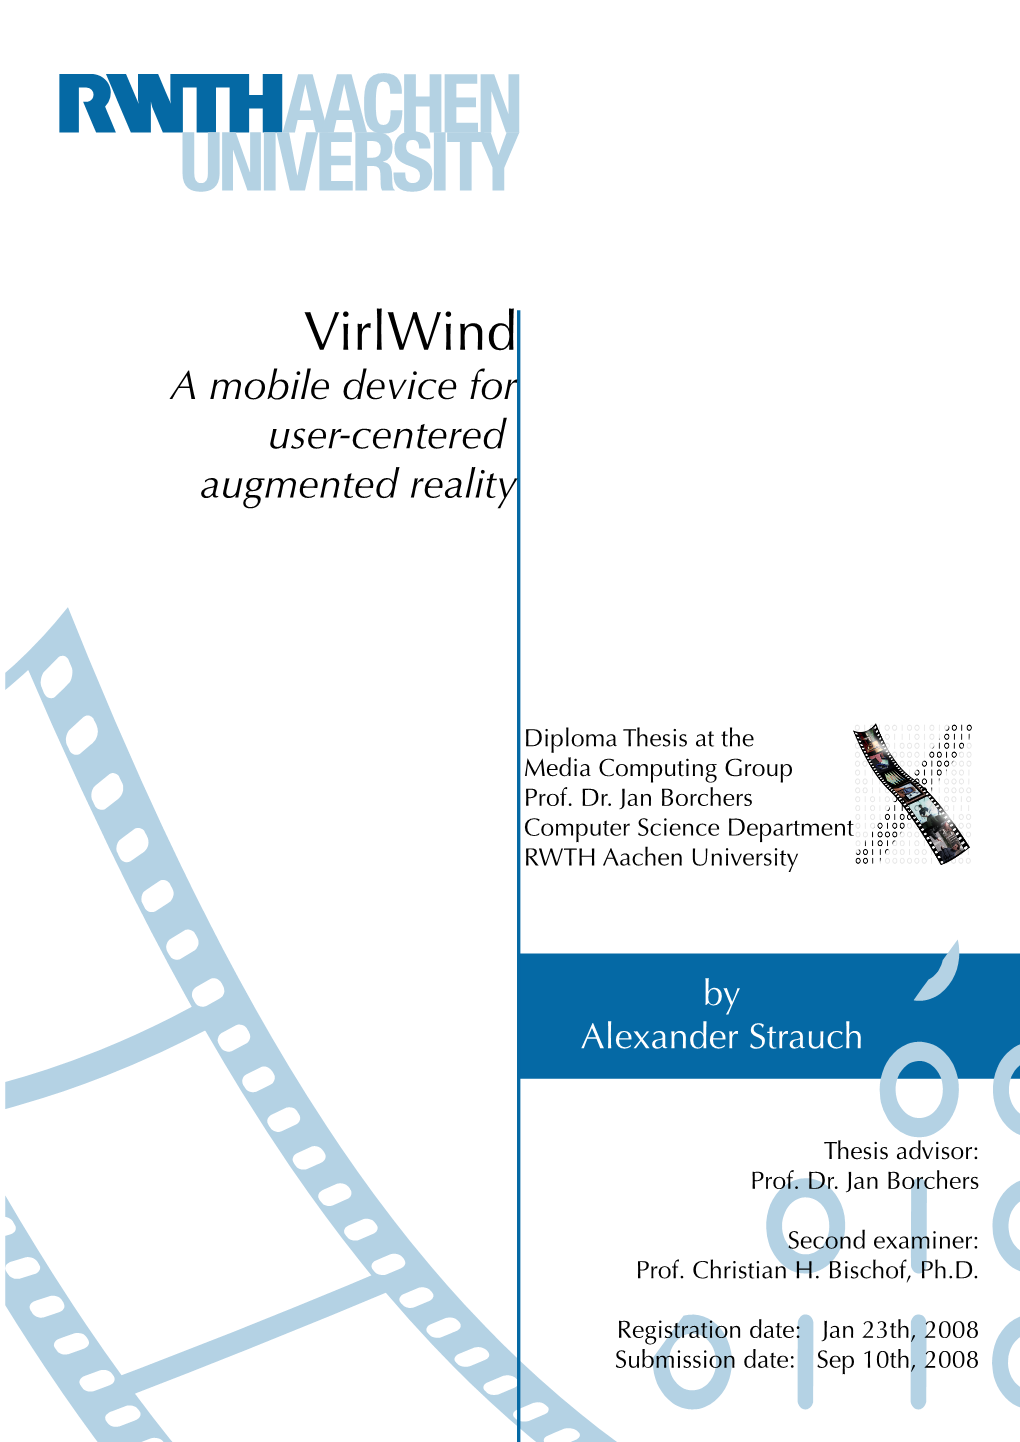 Virlwind a Mobile Device for User-Centered Augmented Reality